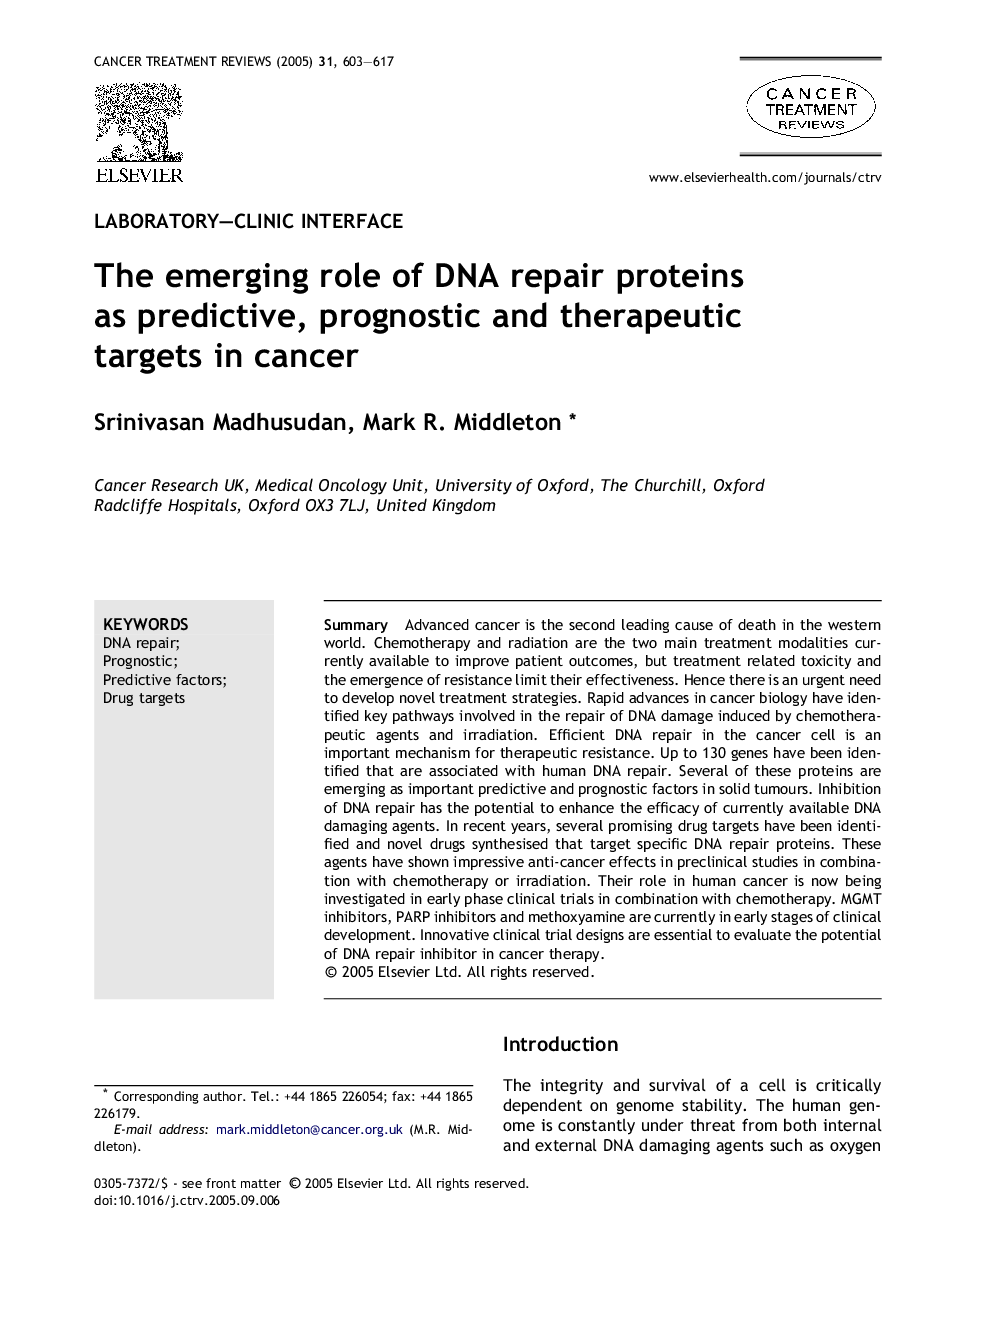 The emerging role of DNA repair proteins as predictive, prognostic and therapeutic targets in cancer